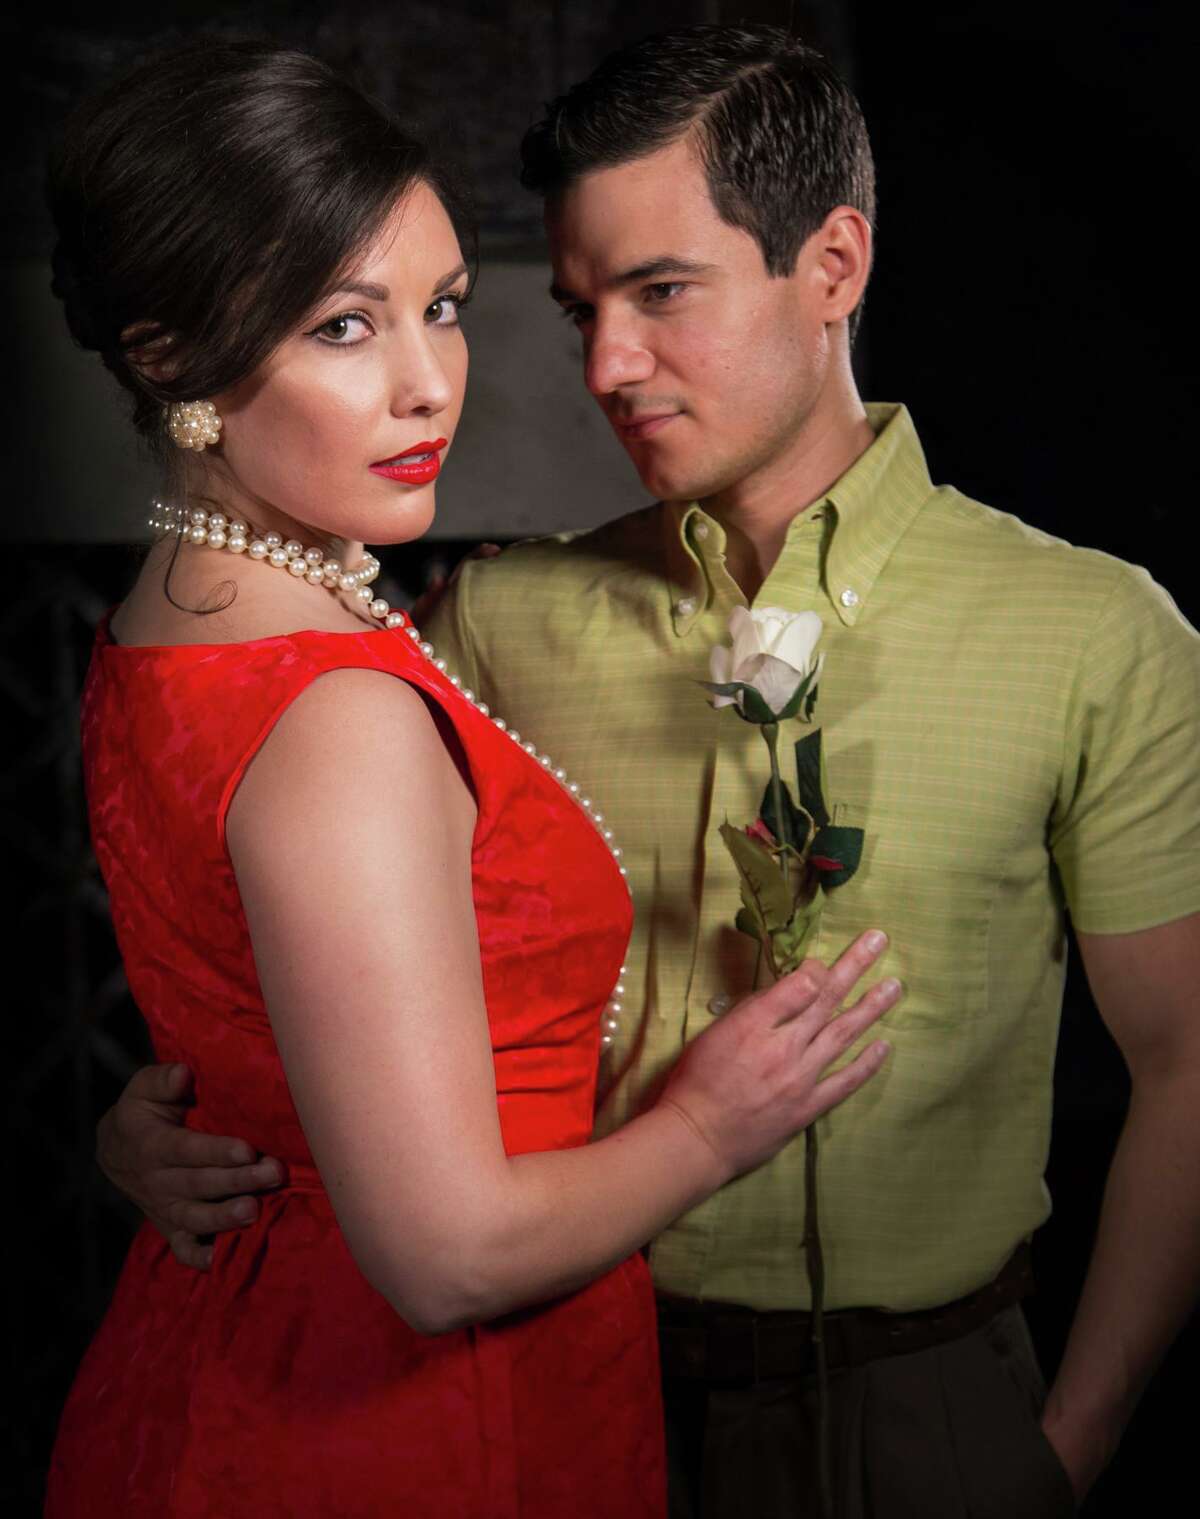 Pictured are Amanda Martinez as Julia and Ricardo Hernandez-Morgan as Mario in Main Street Theater’s “Aunt Julia and the Scriptwriter,” based on the novel by Nobel Prize winner Mario Vargas-Llosa, a play by Caridad Svich.